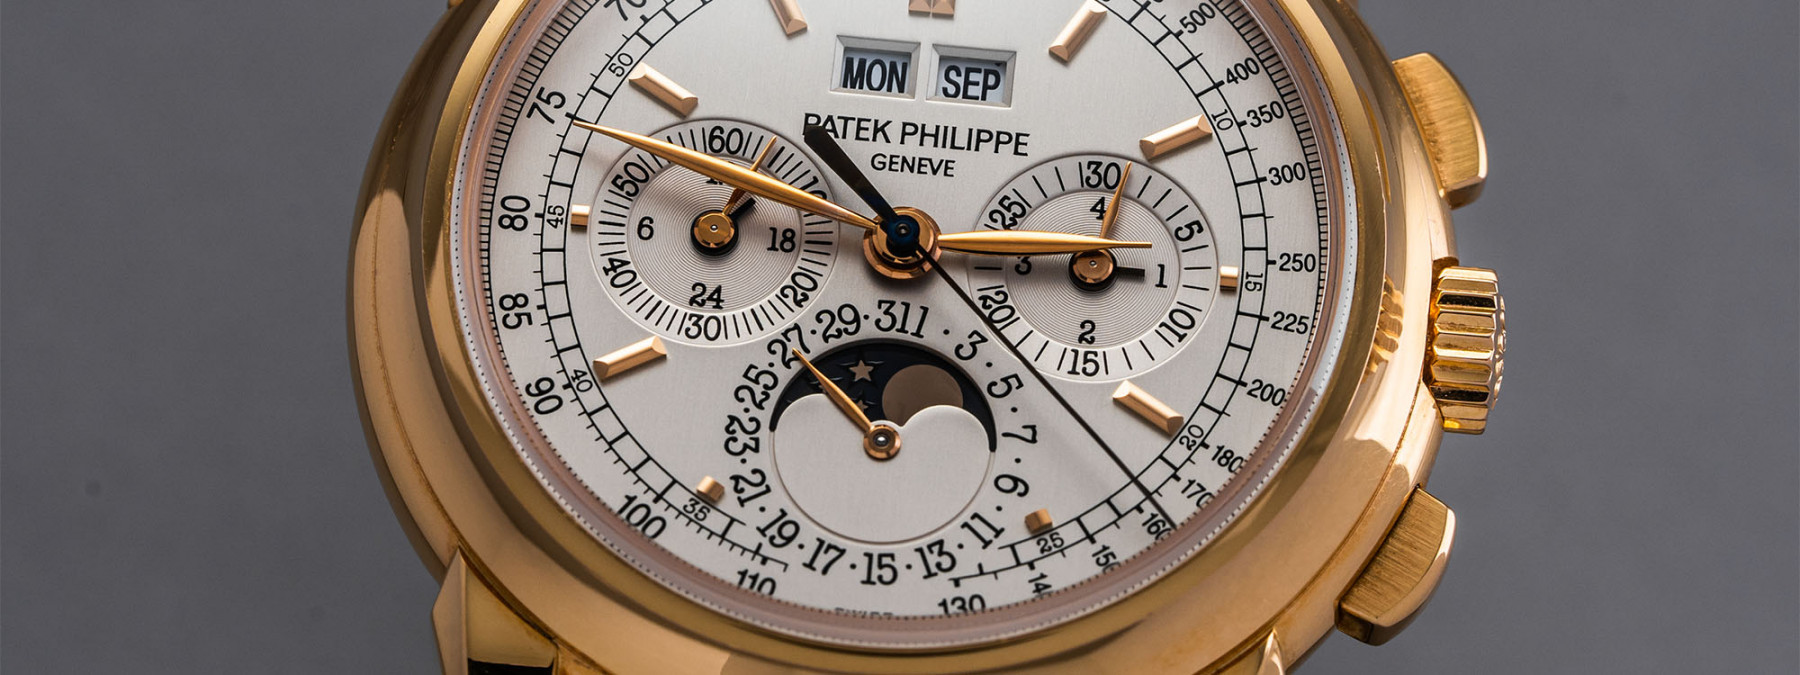 Perpetual Calendar Watches from The World